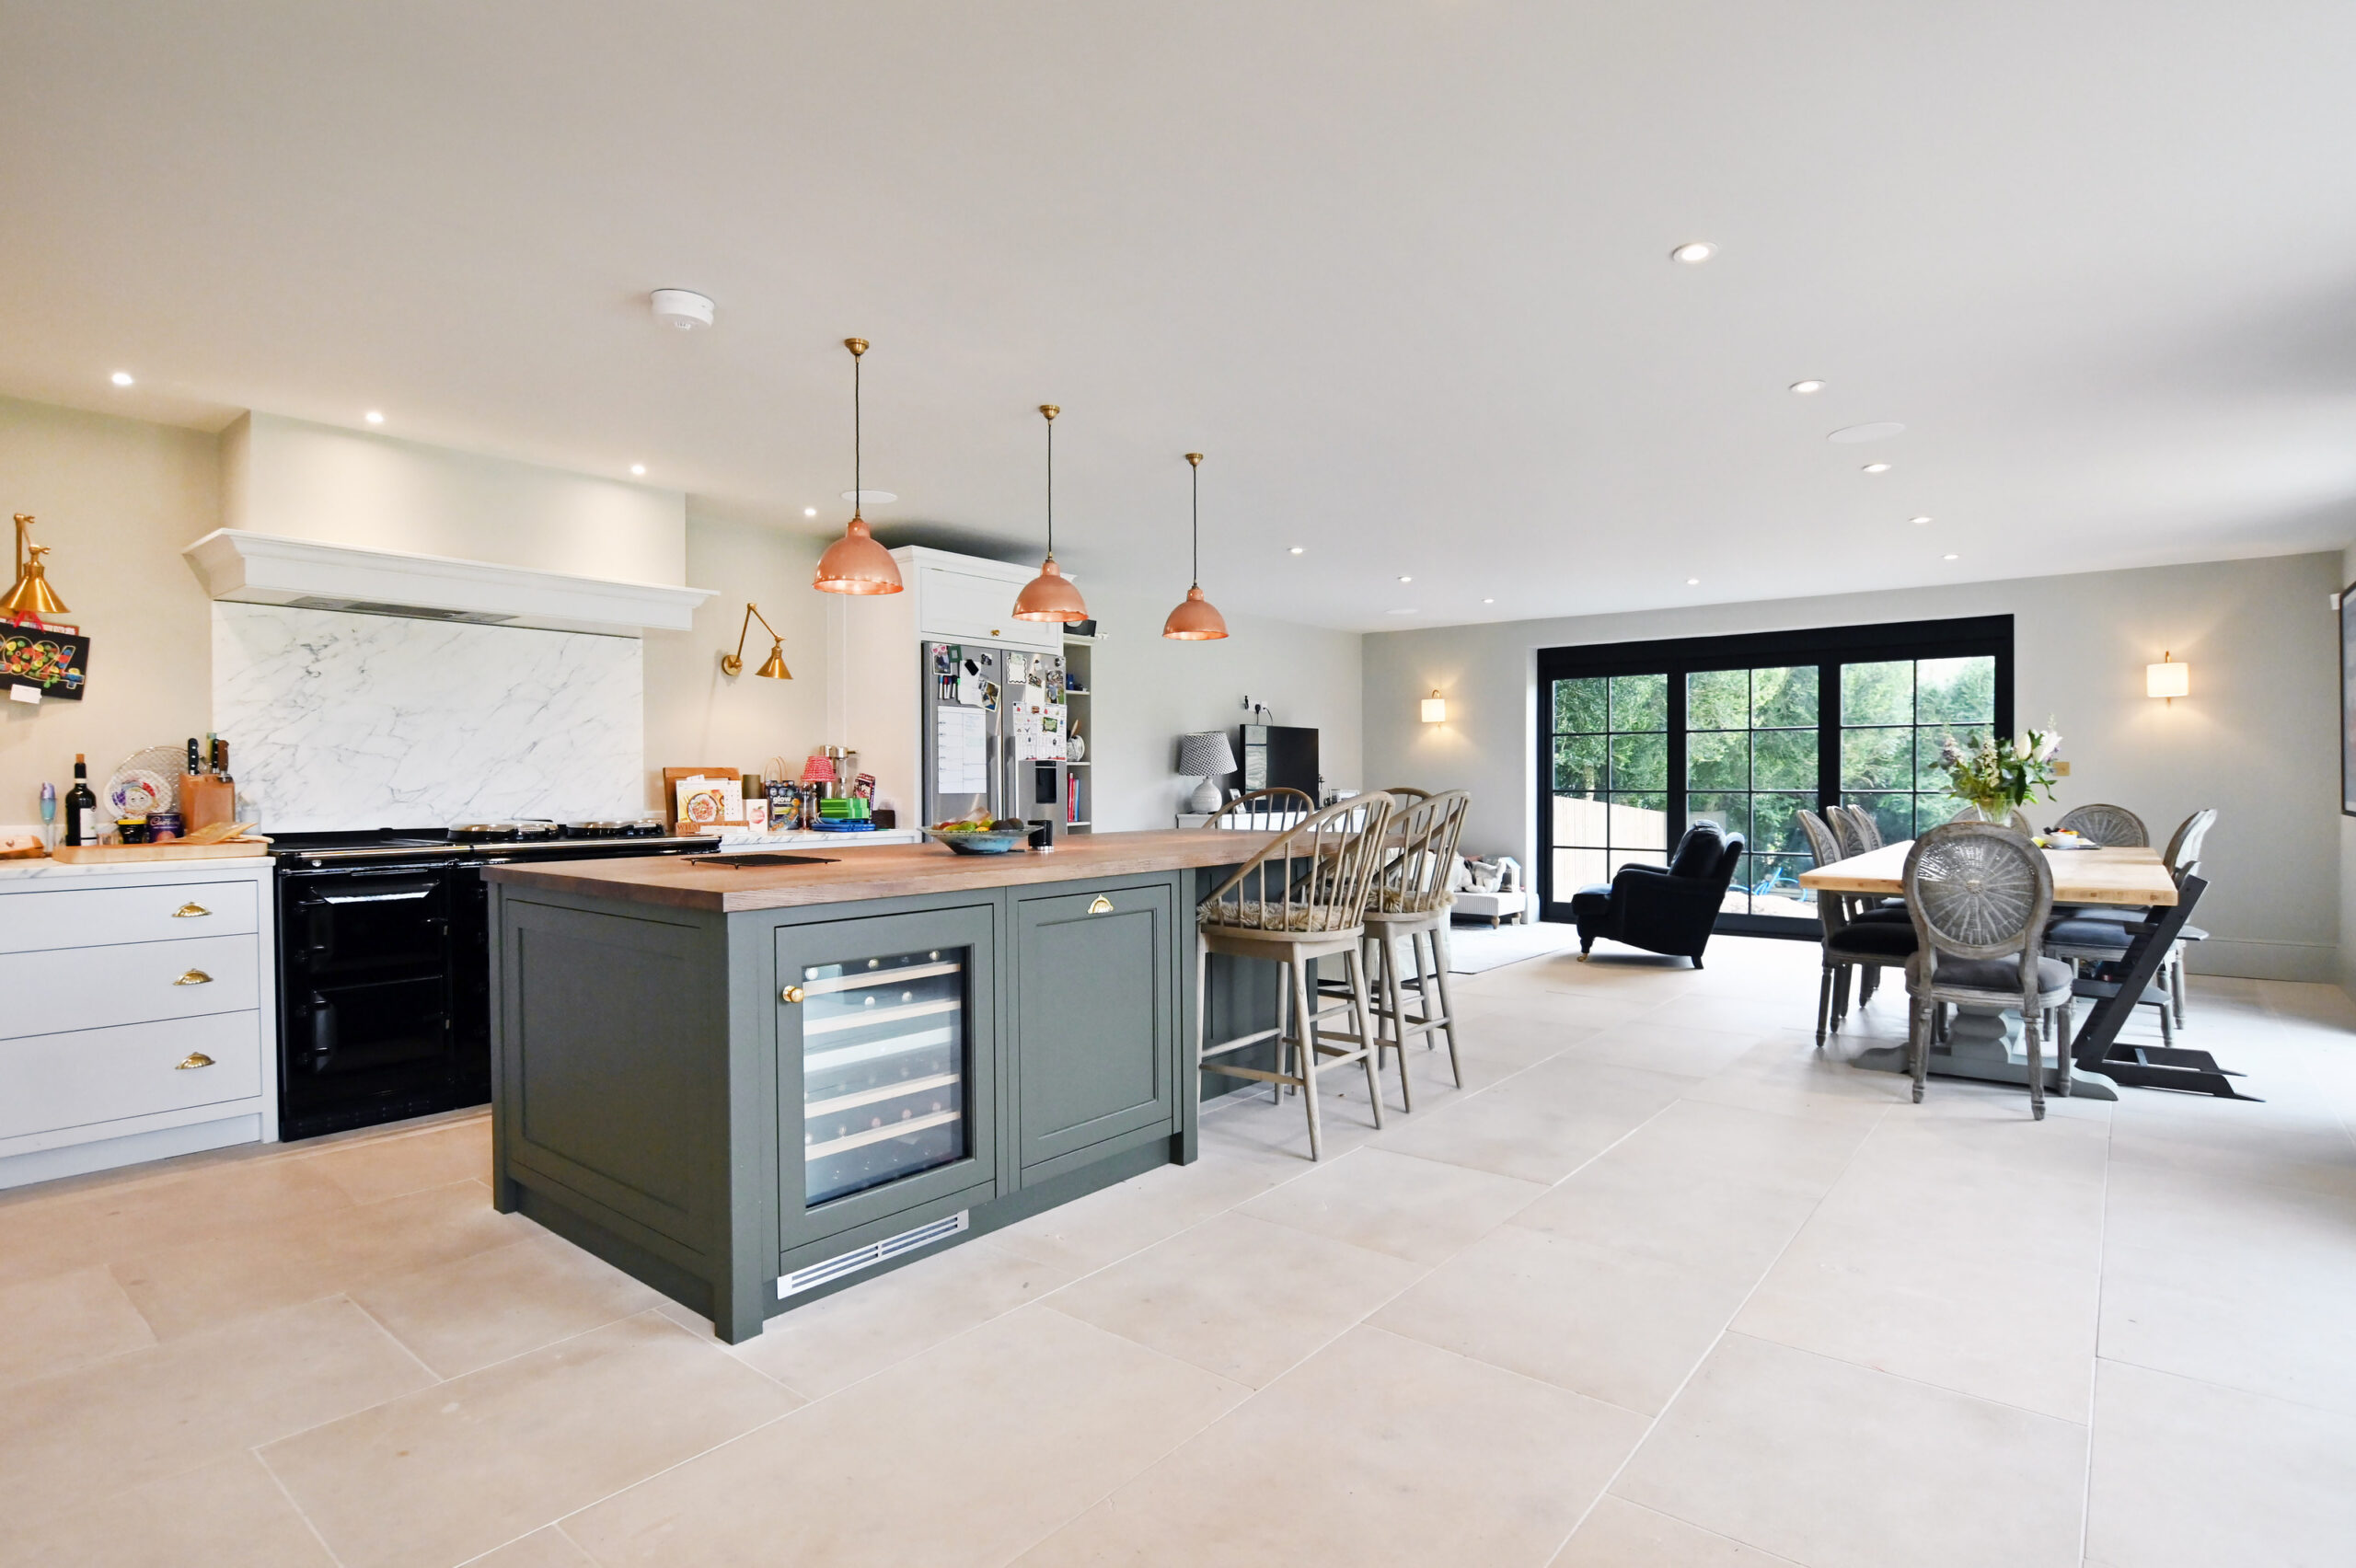 Open plan kitchen and living area - large home extension Marlborough